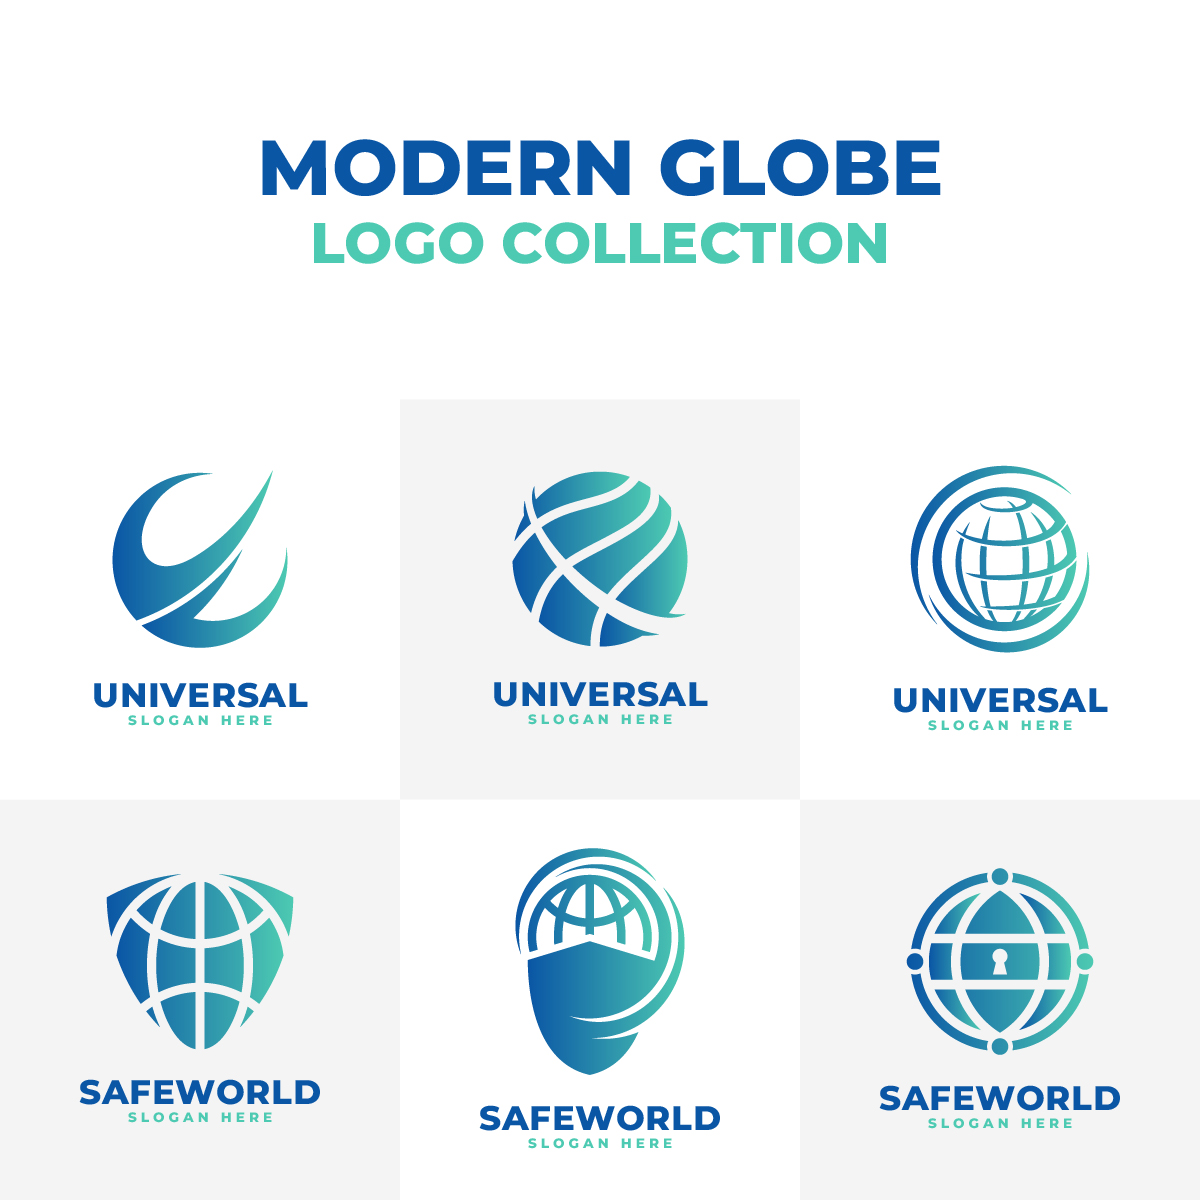 Modern Gradient Globe Logo Collection cover image.